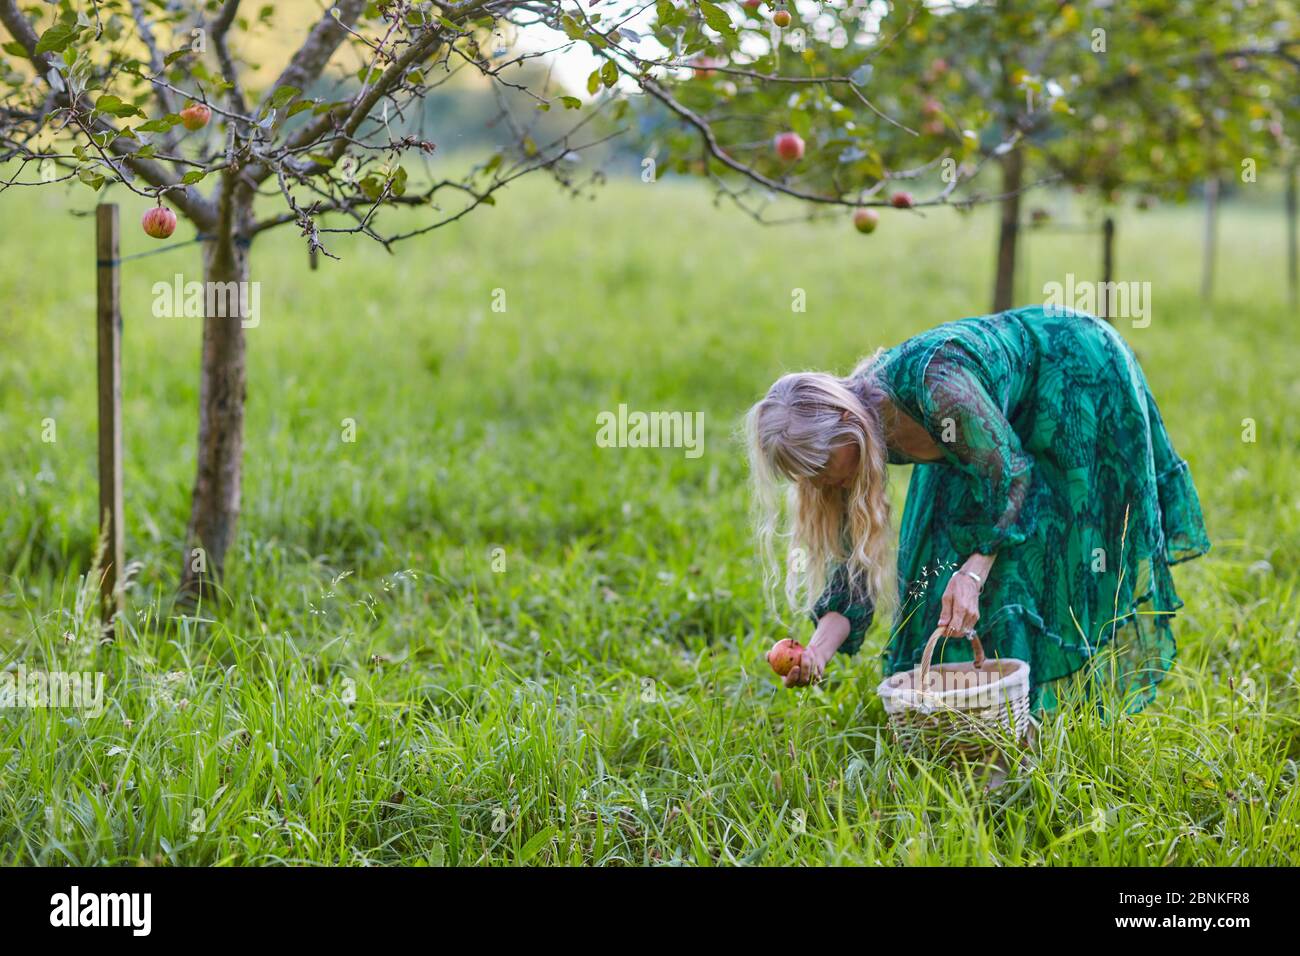 Apple harvest, apple tree, basket, apples, middle-aged woman, orchard meadow, Stock Photo